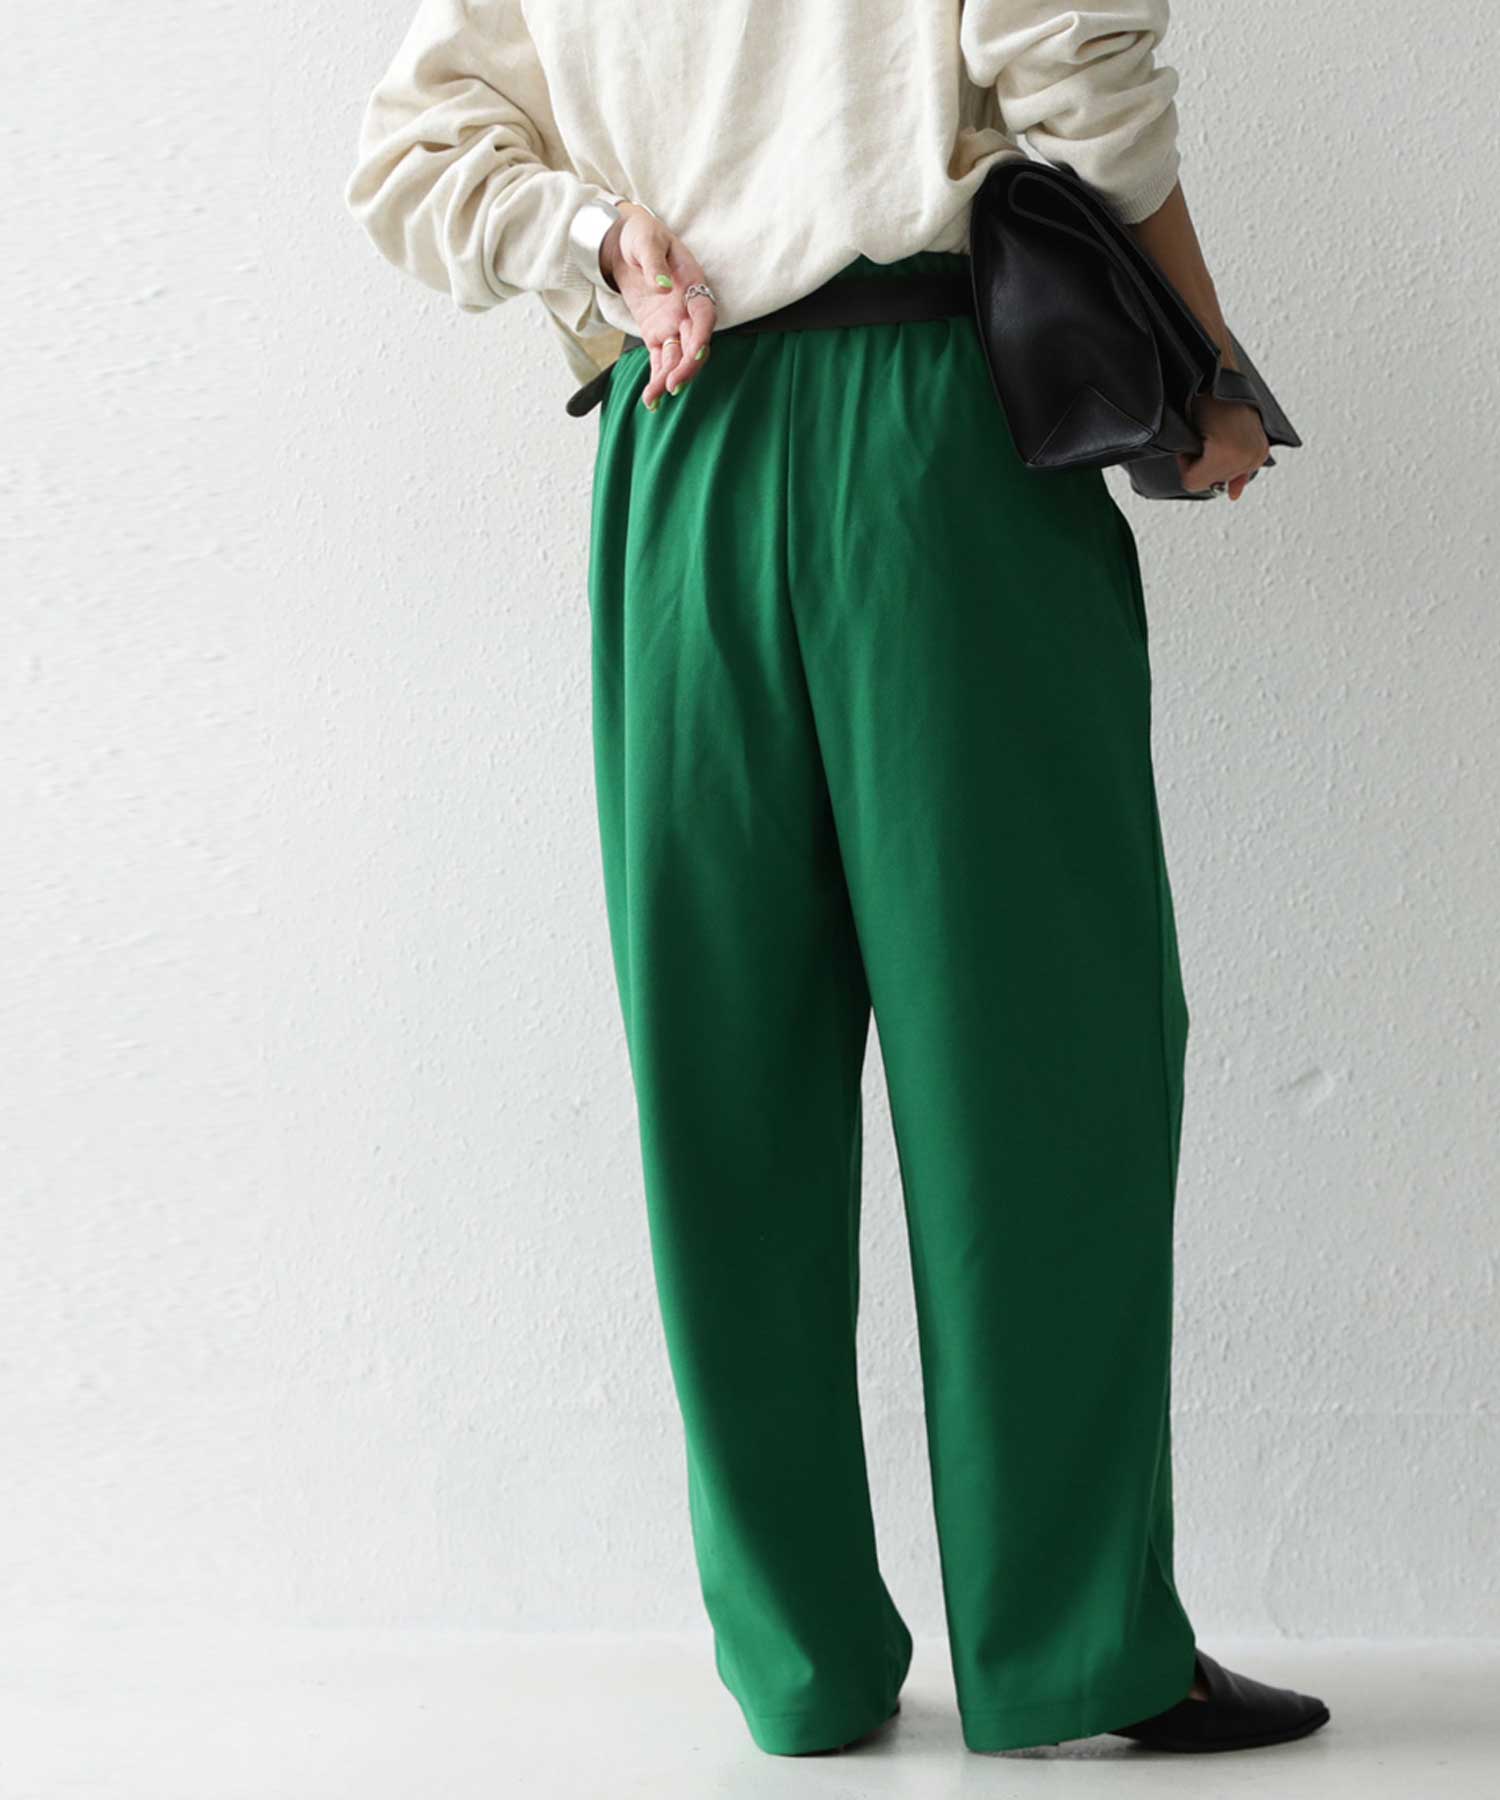 It's Trouser Season: 8 Ways We're Wearing the Pants This Fall